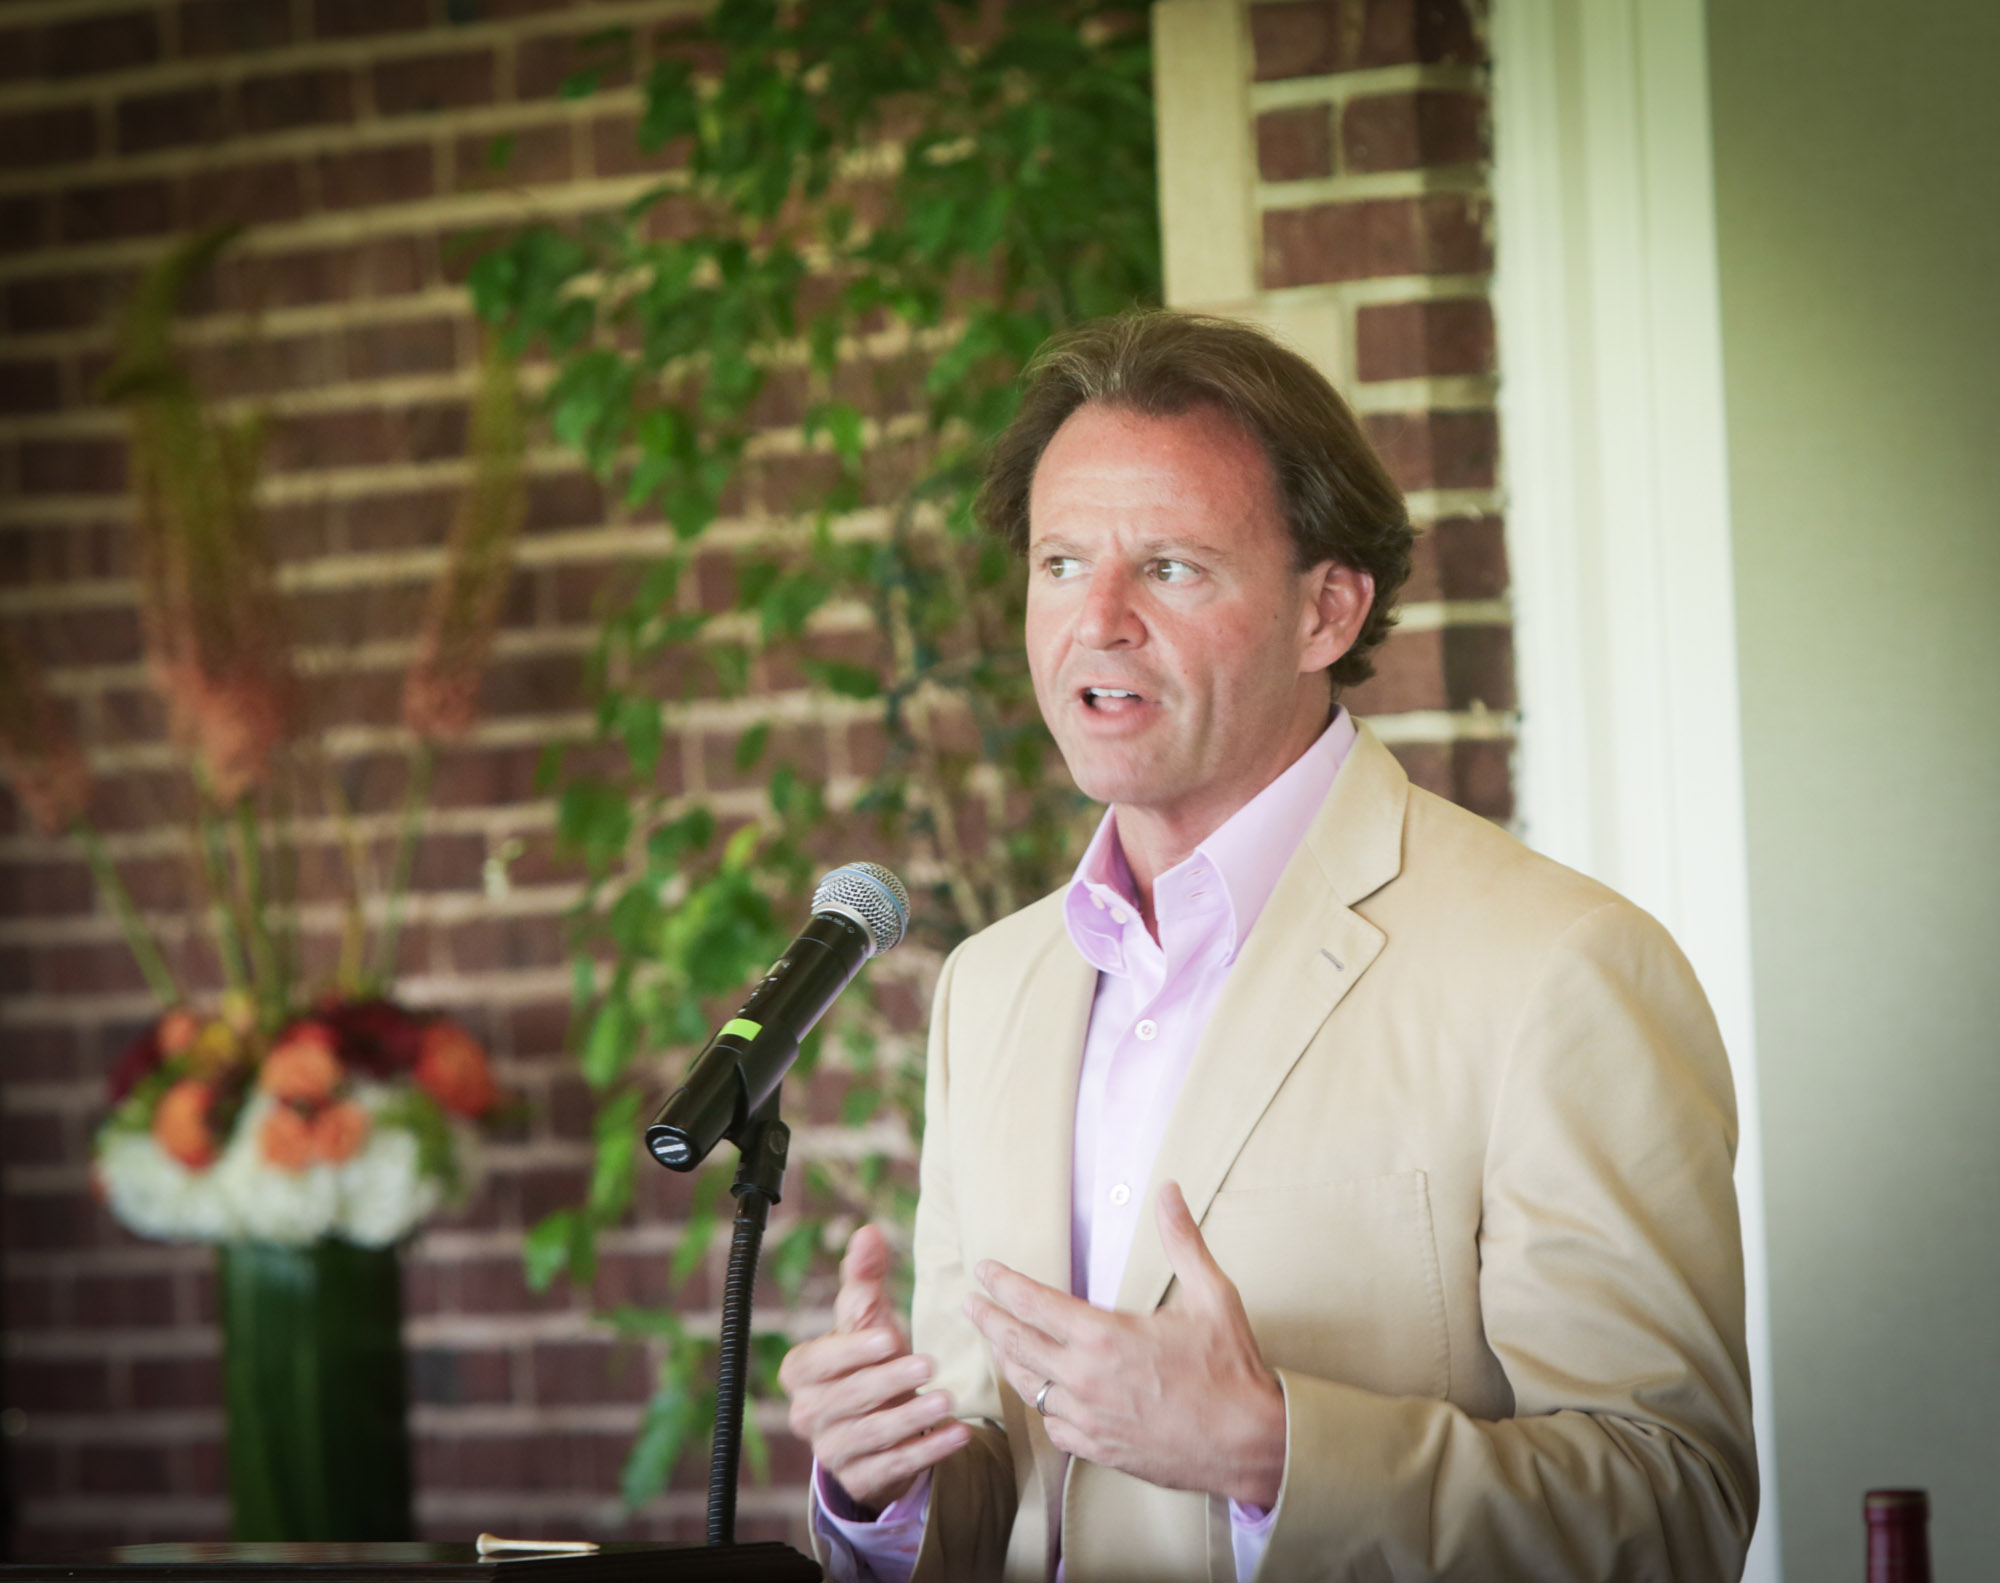 Jeffrey Citron, co-founder of Charles Lafitte Foundation welcomes the crowd to the Foundation’s 12th annual Charity Golf Classic, and talks about this year’s beneficiary, Count Basie Theatre.